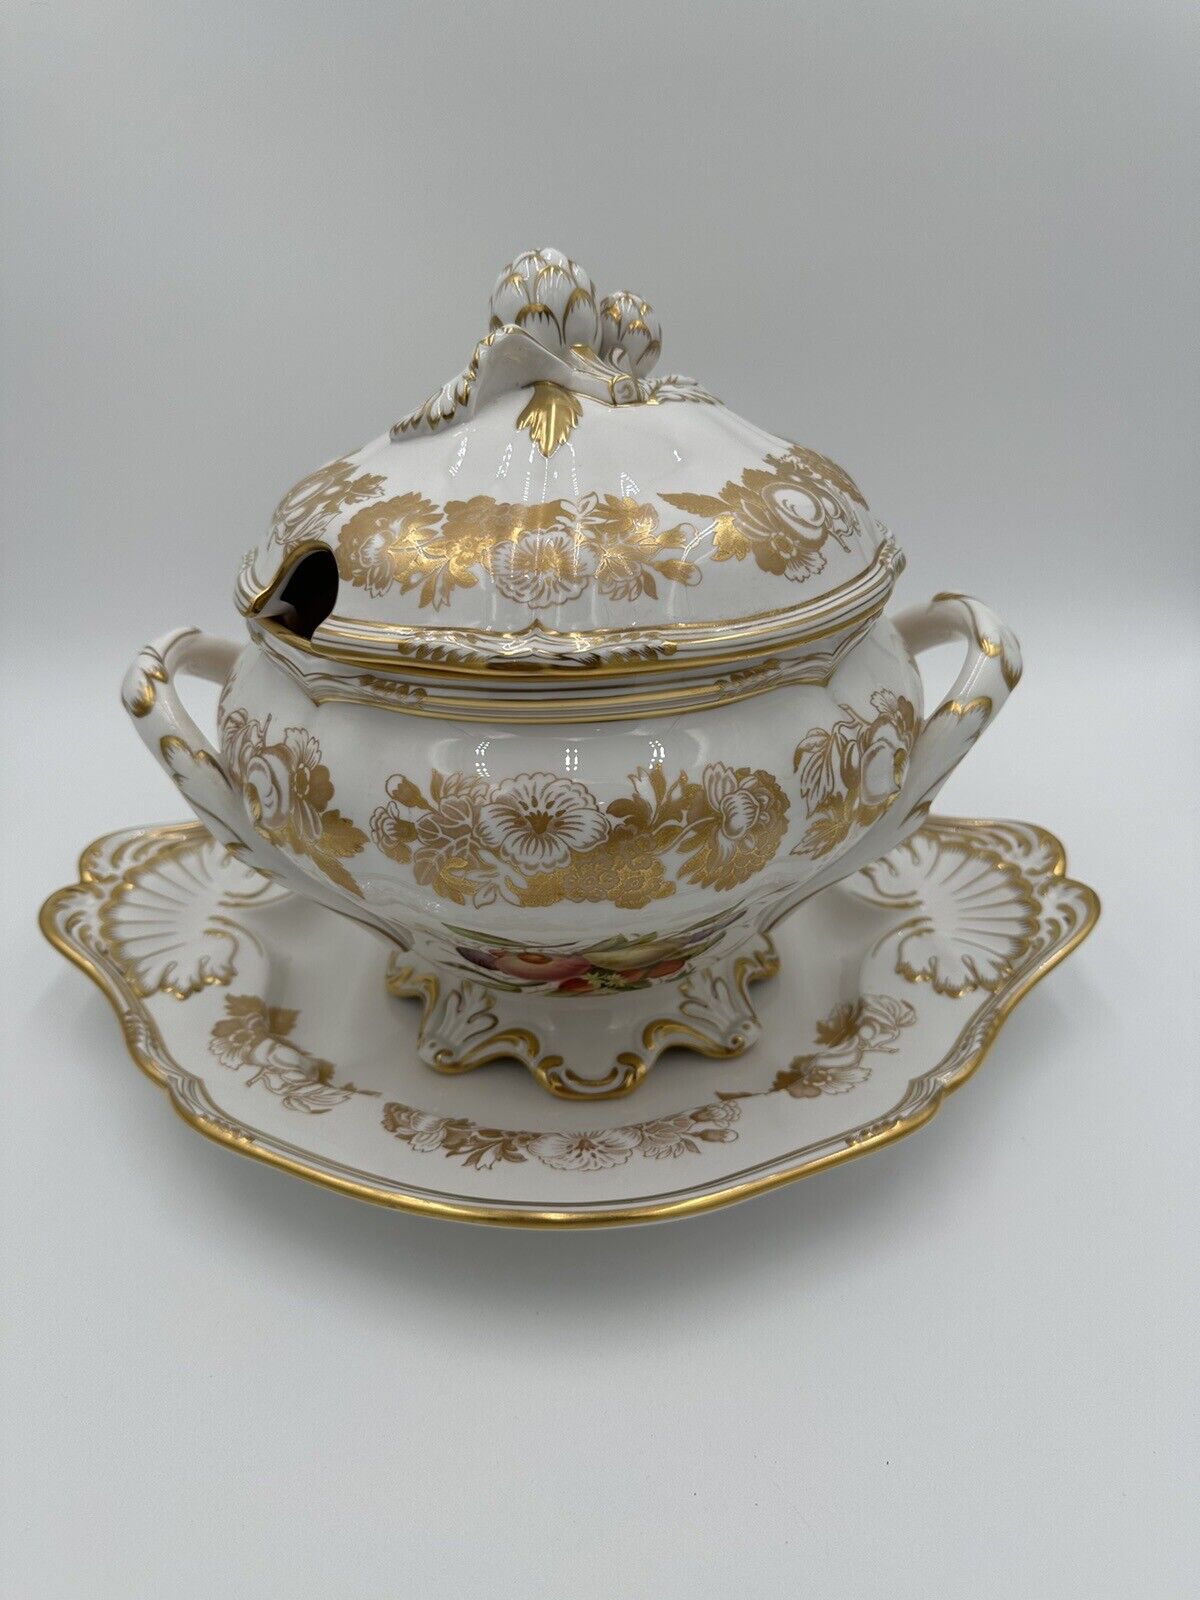 Spode Fine Bone China - Golden Valley - Y7840-A - Tureen & Lid W/ Underplate